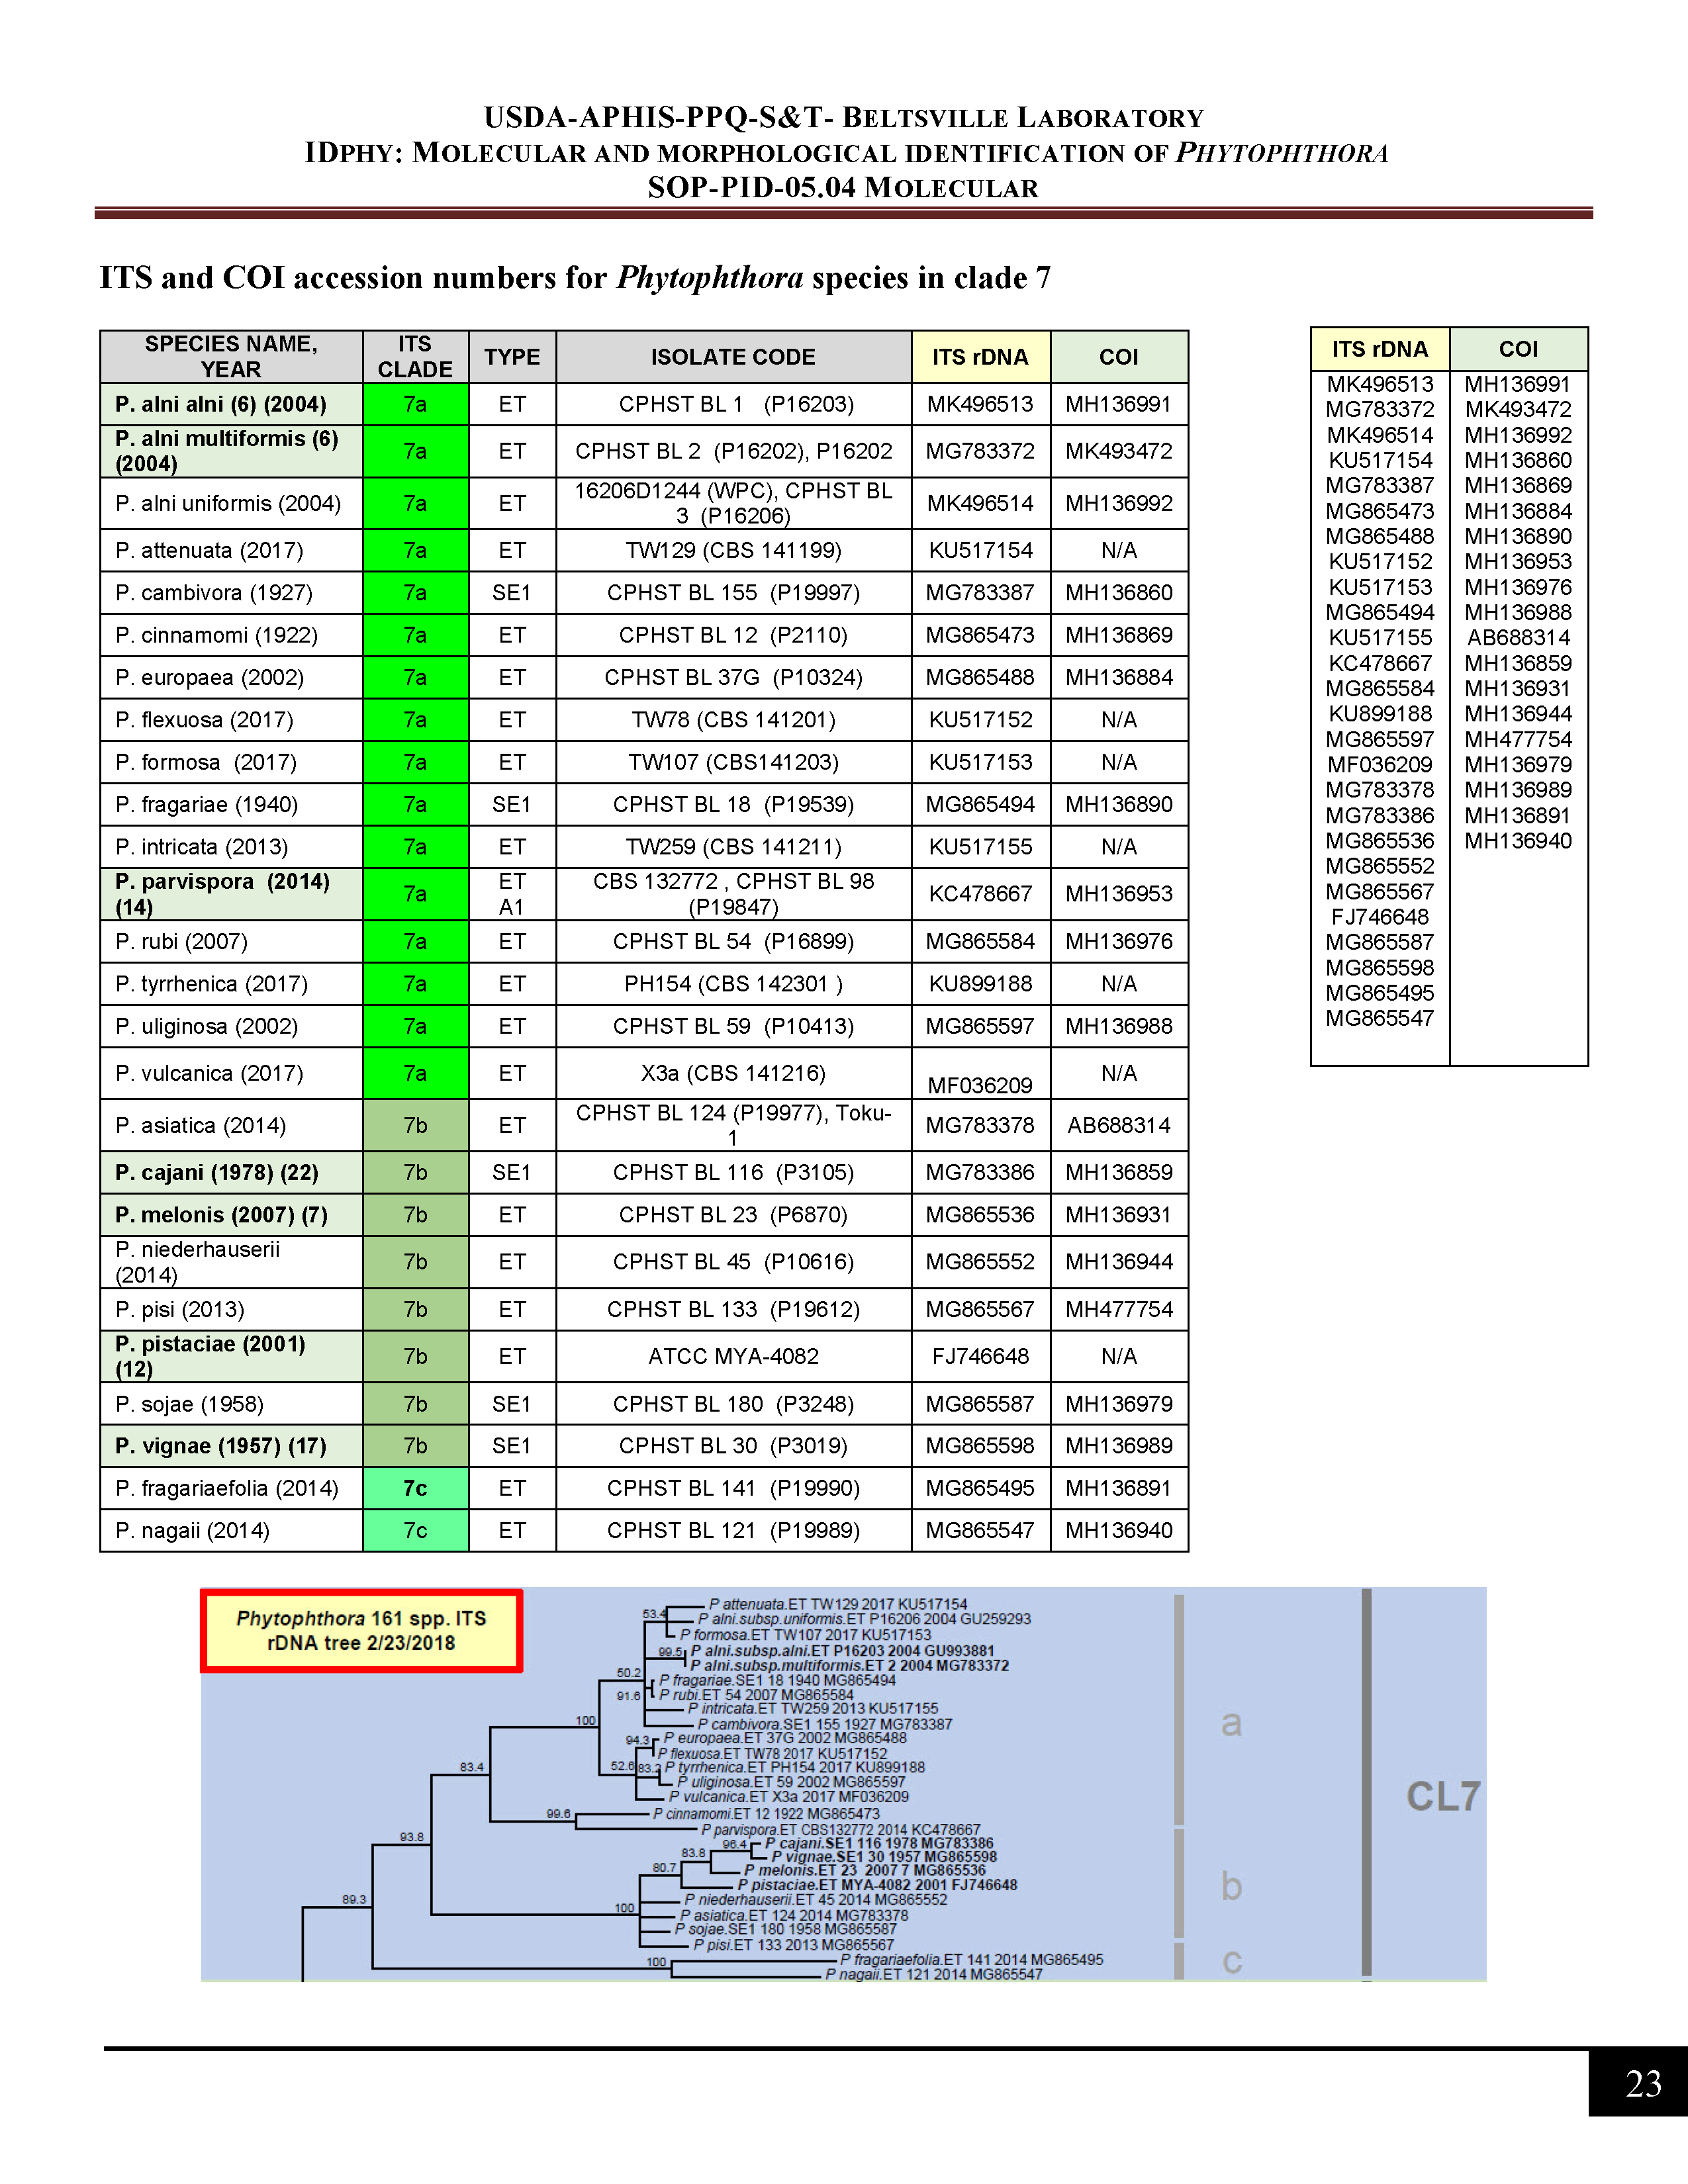 ITS and COI accession numbers for <em>Phytophthora</em> species in clade 7